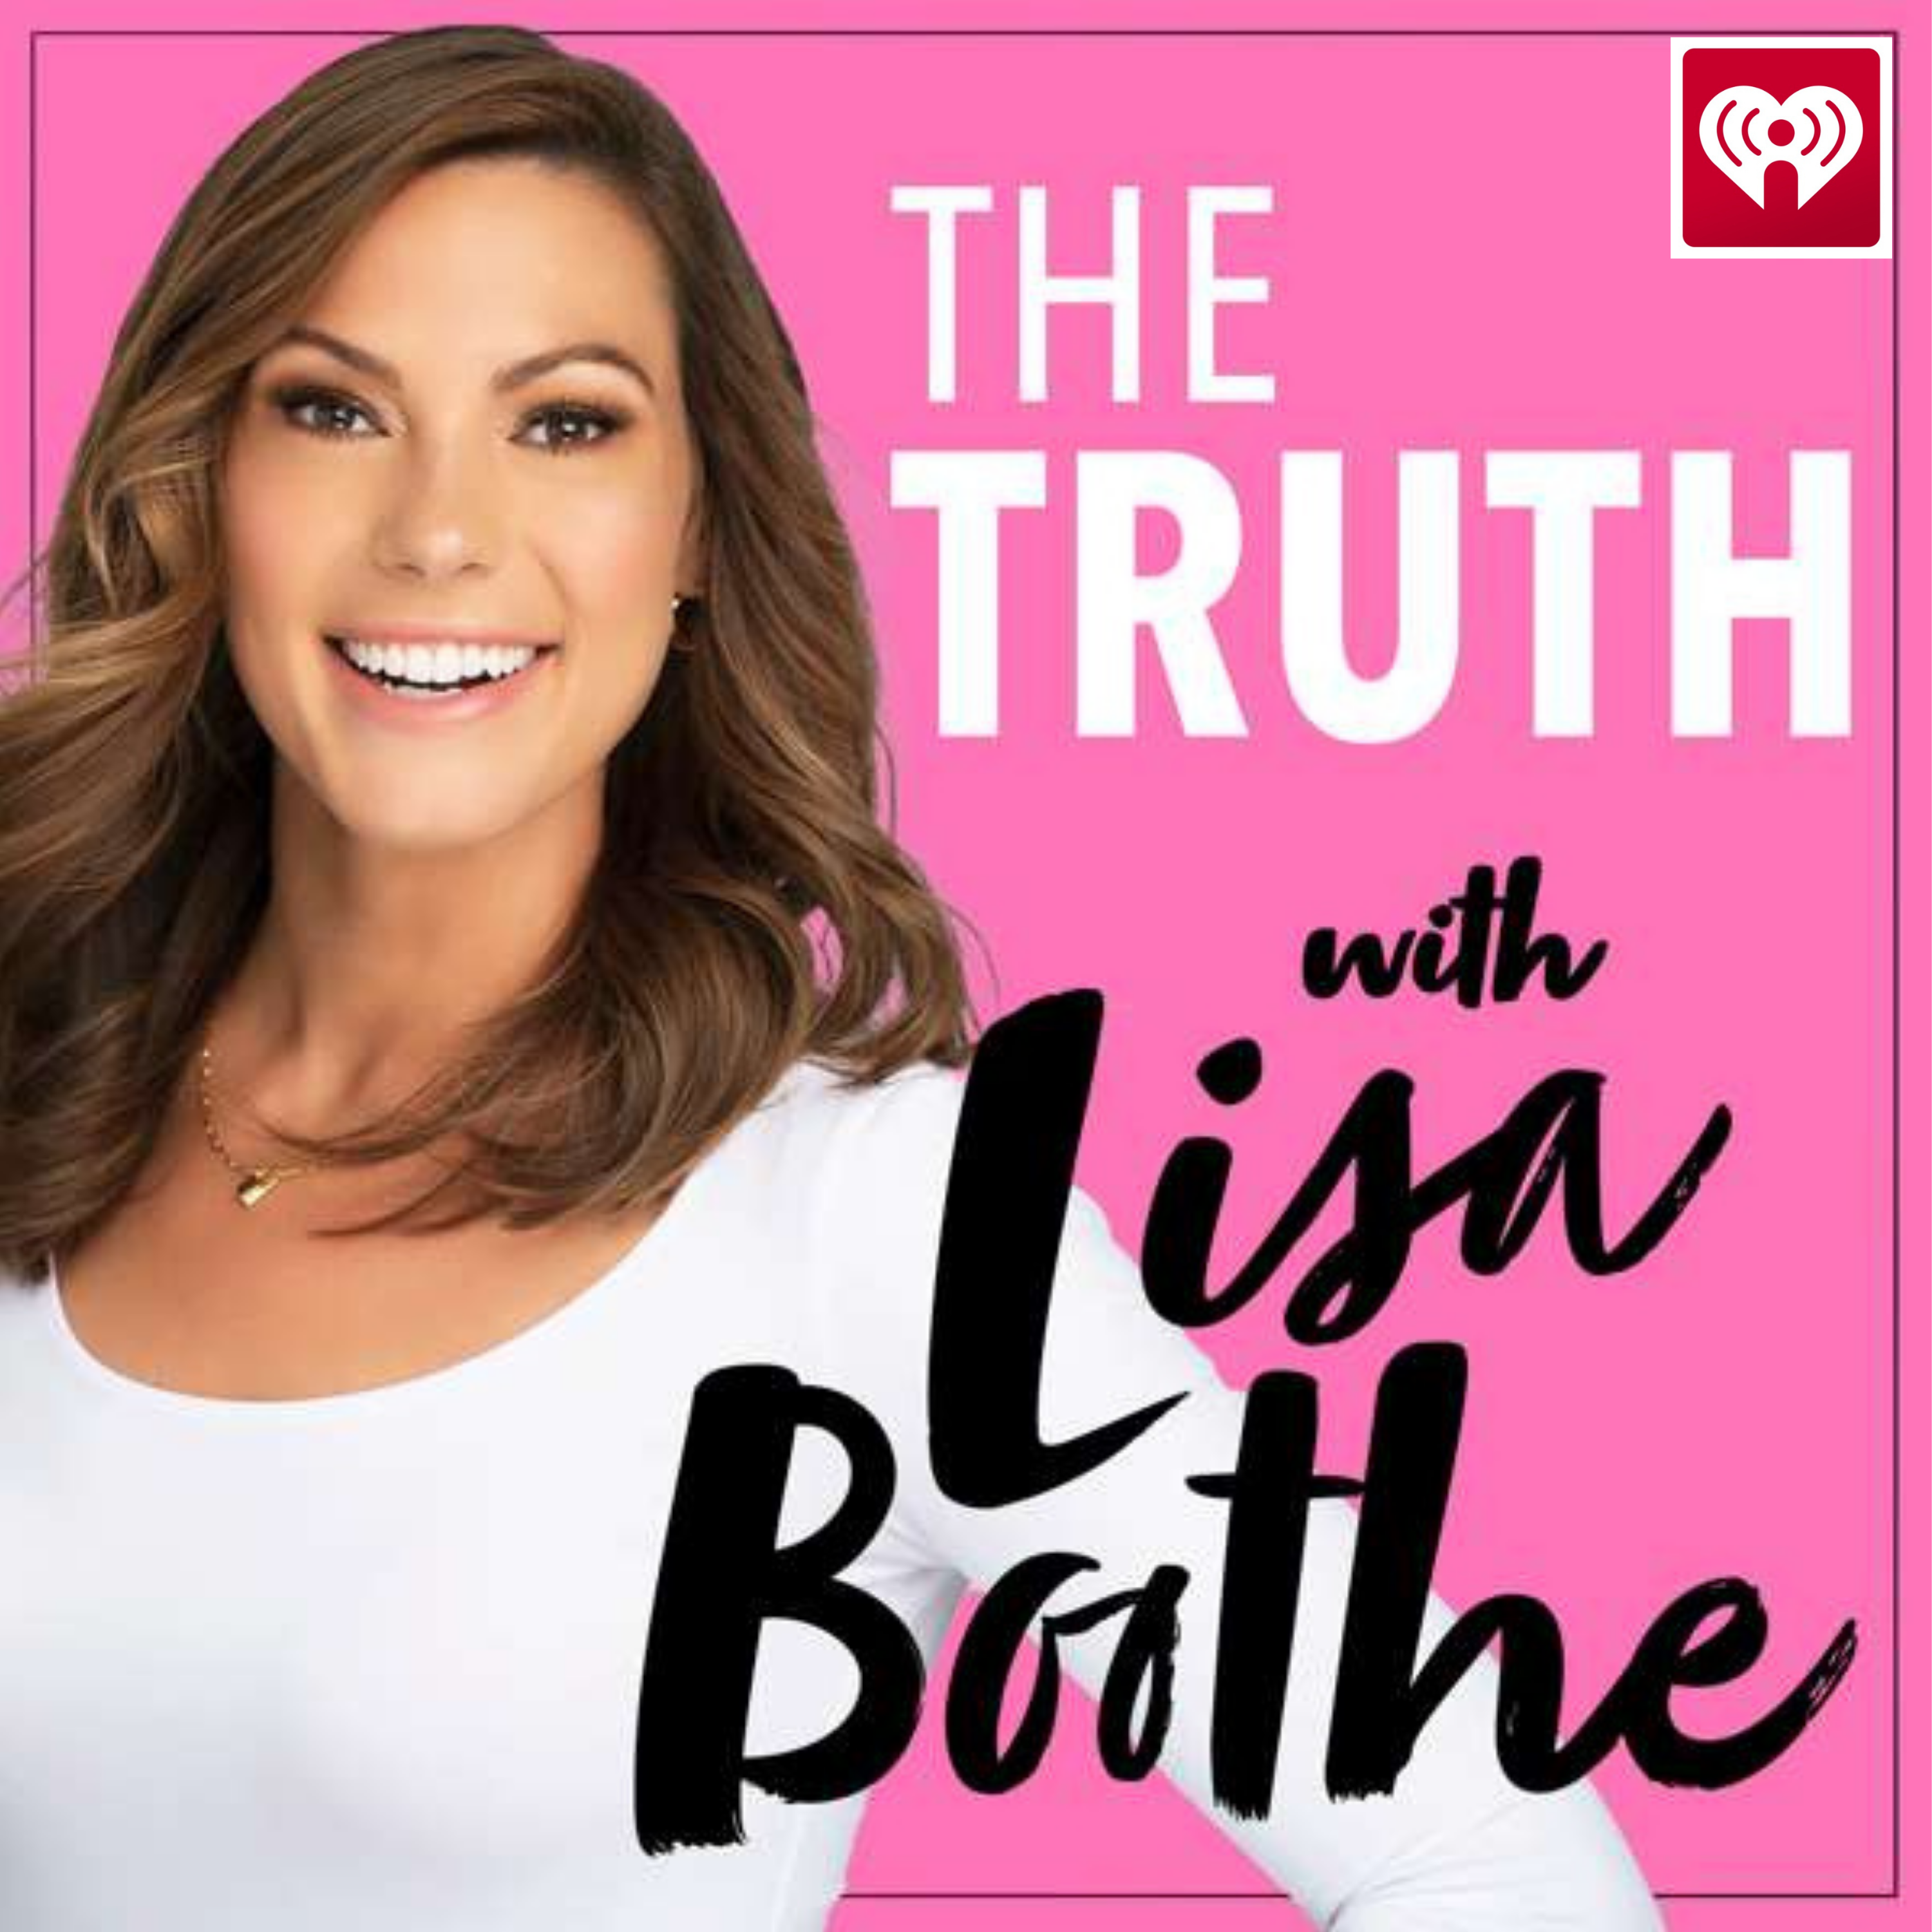 The Truth with Lisa Boothe: Inside the Most Violent Pro-Hamas Rallies with Julio Rosas